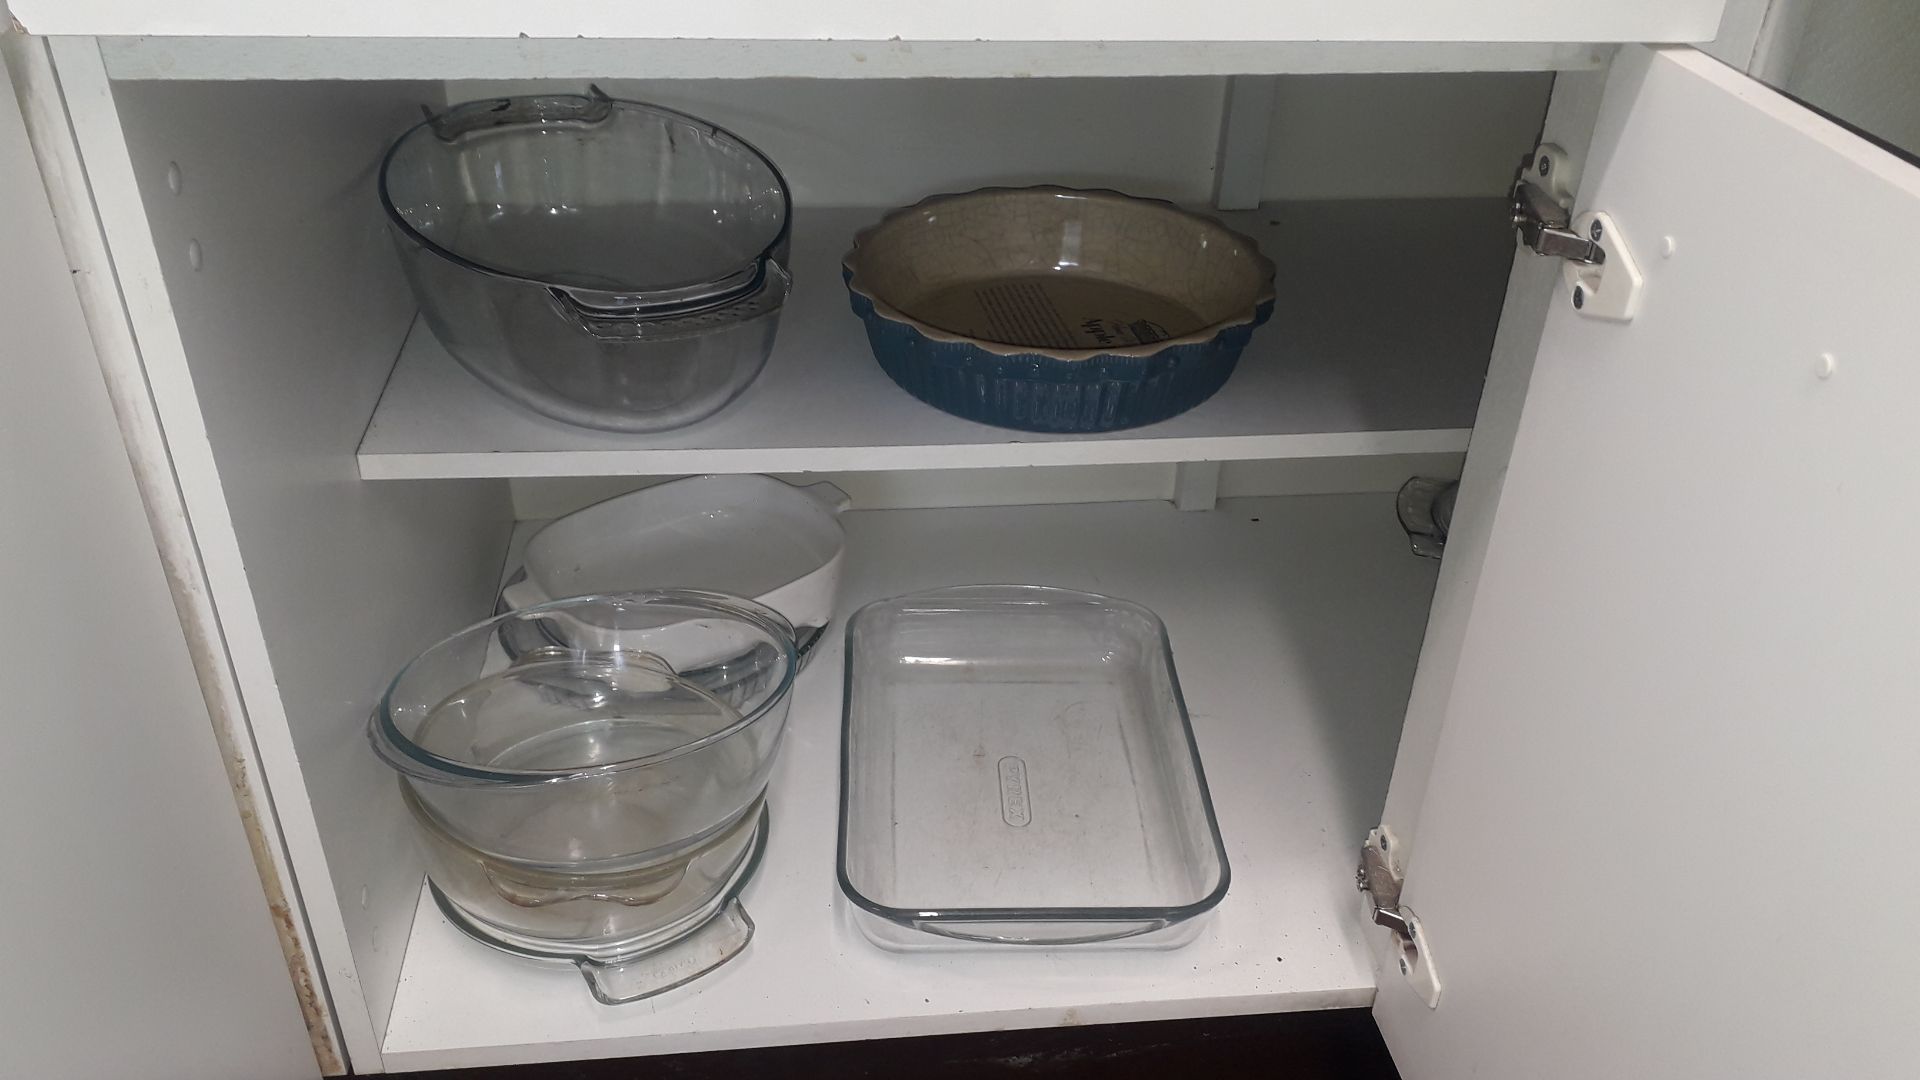 Quantity of Stock Pots, Pans, Mixing Bowls & Pyrex Cookware - Image 6 of 7